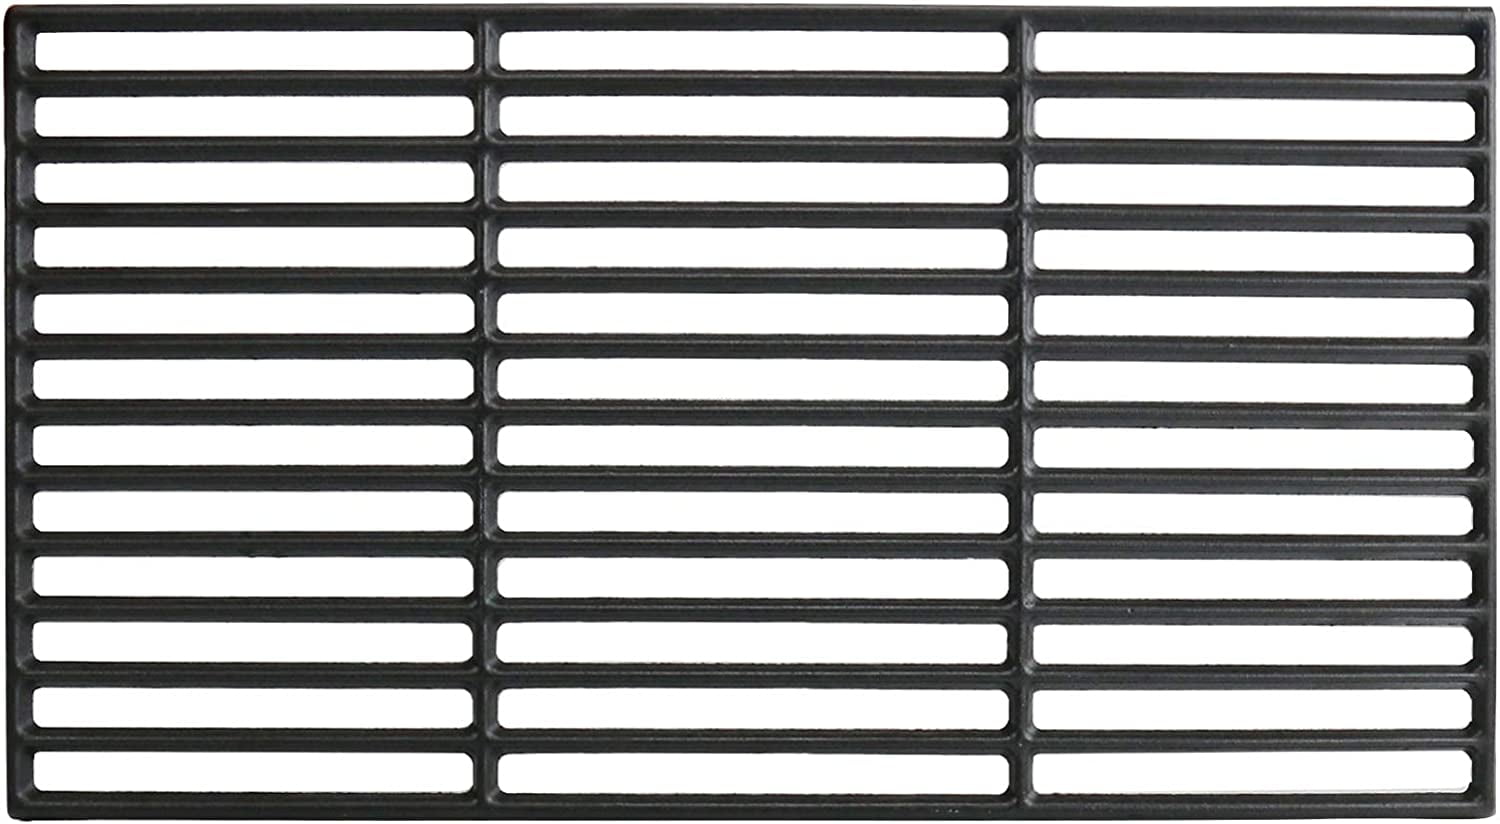 Grisun Cast Iron Cooking Grid Grates for Camp Chef SmokePro DLX 24